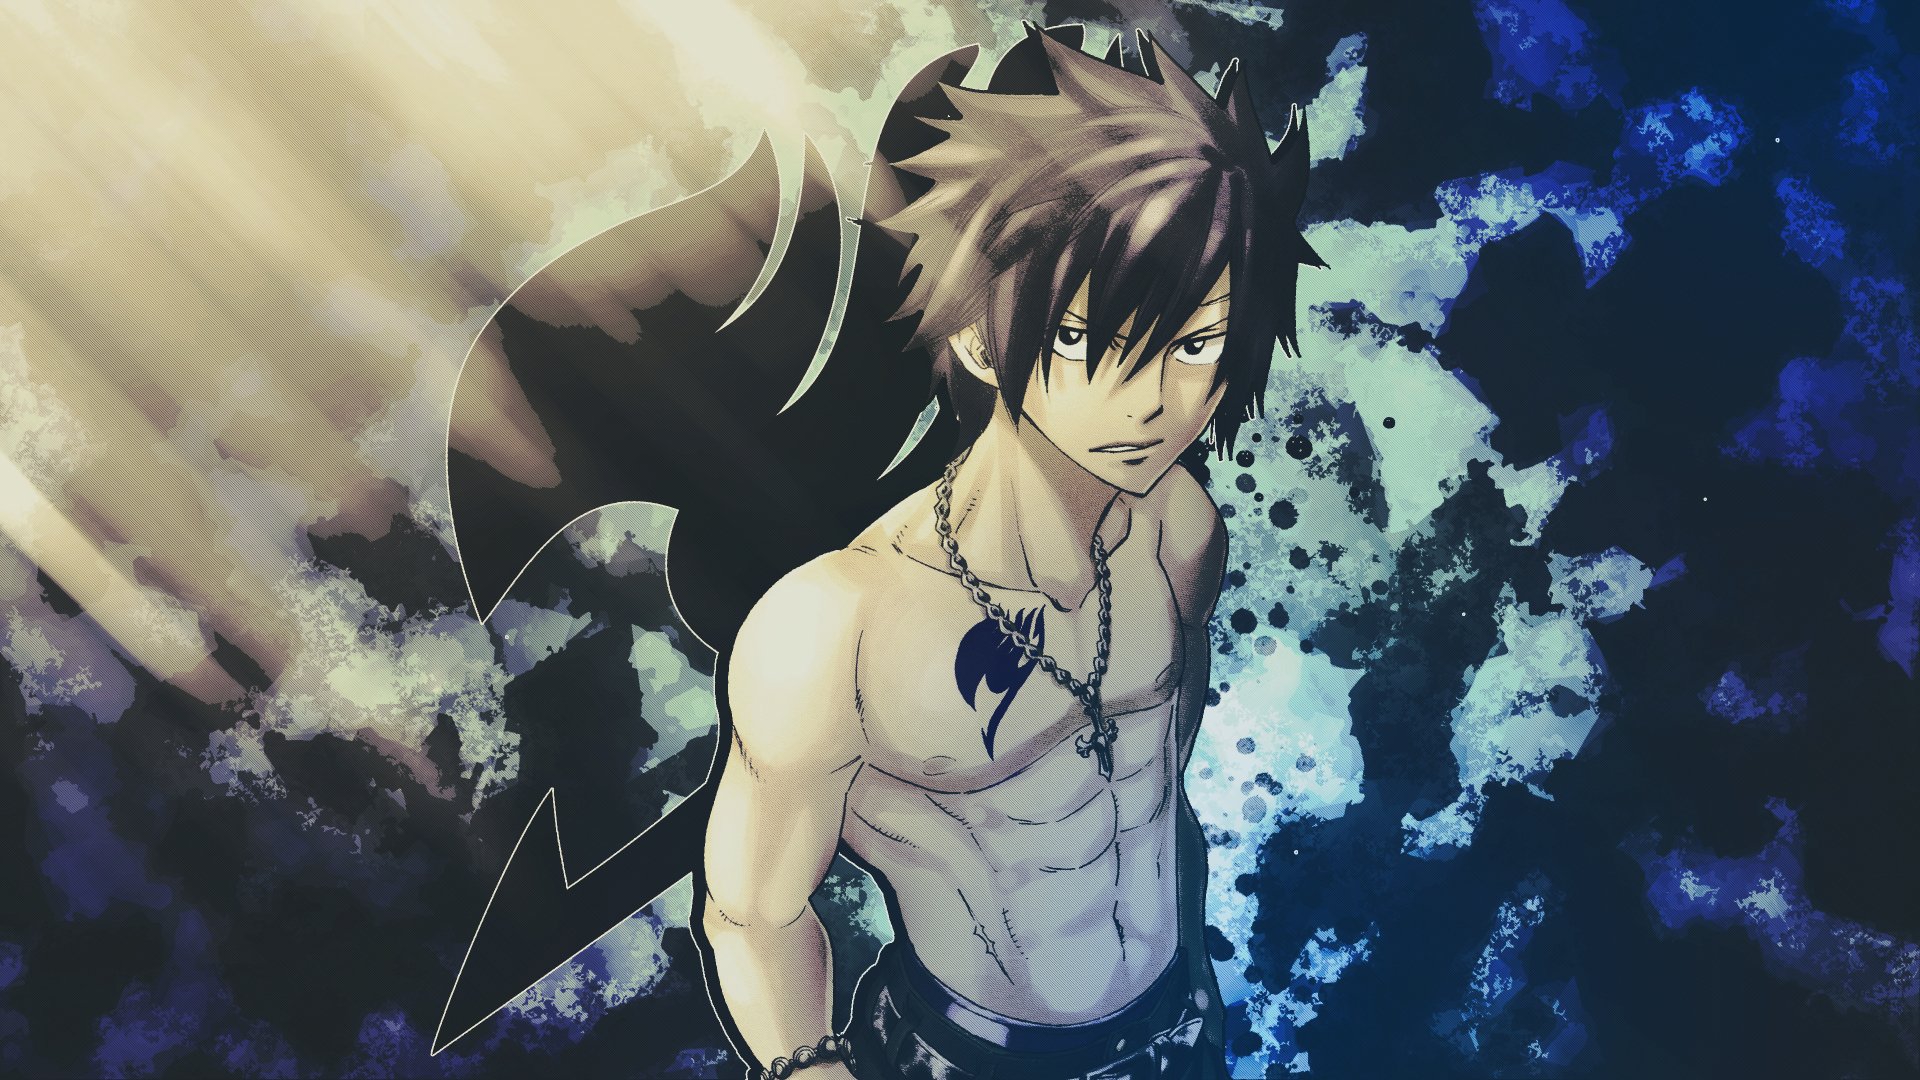 Anime Fairy Tail 4k Ultra HD Wallpaper by RoninGFX.